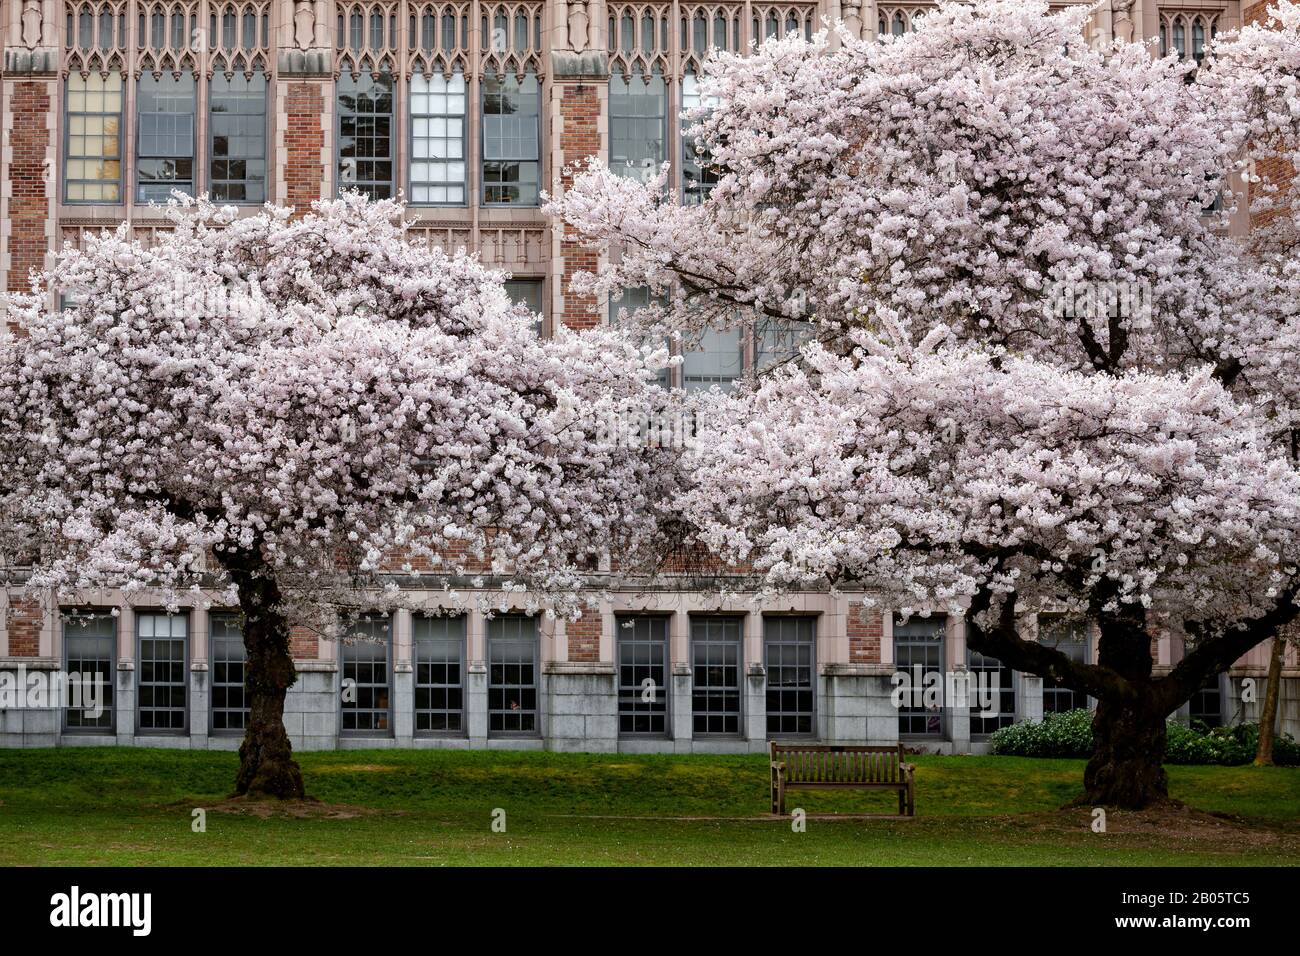 WA17186-00...WASHINGTON - Cherry trees blooming in the Quad at the University Of Washington in Seattle. Stock Photo